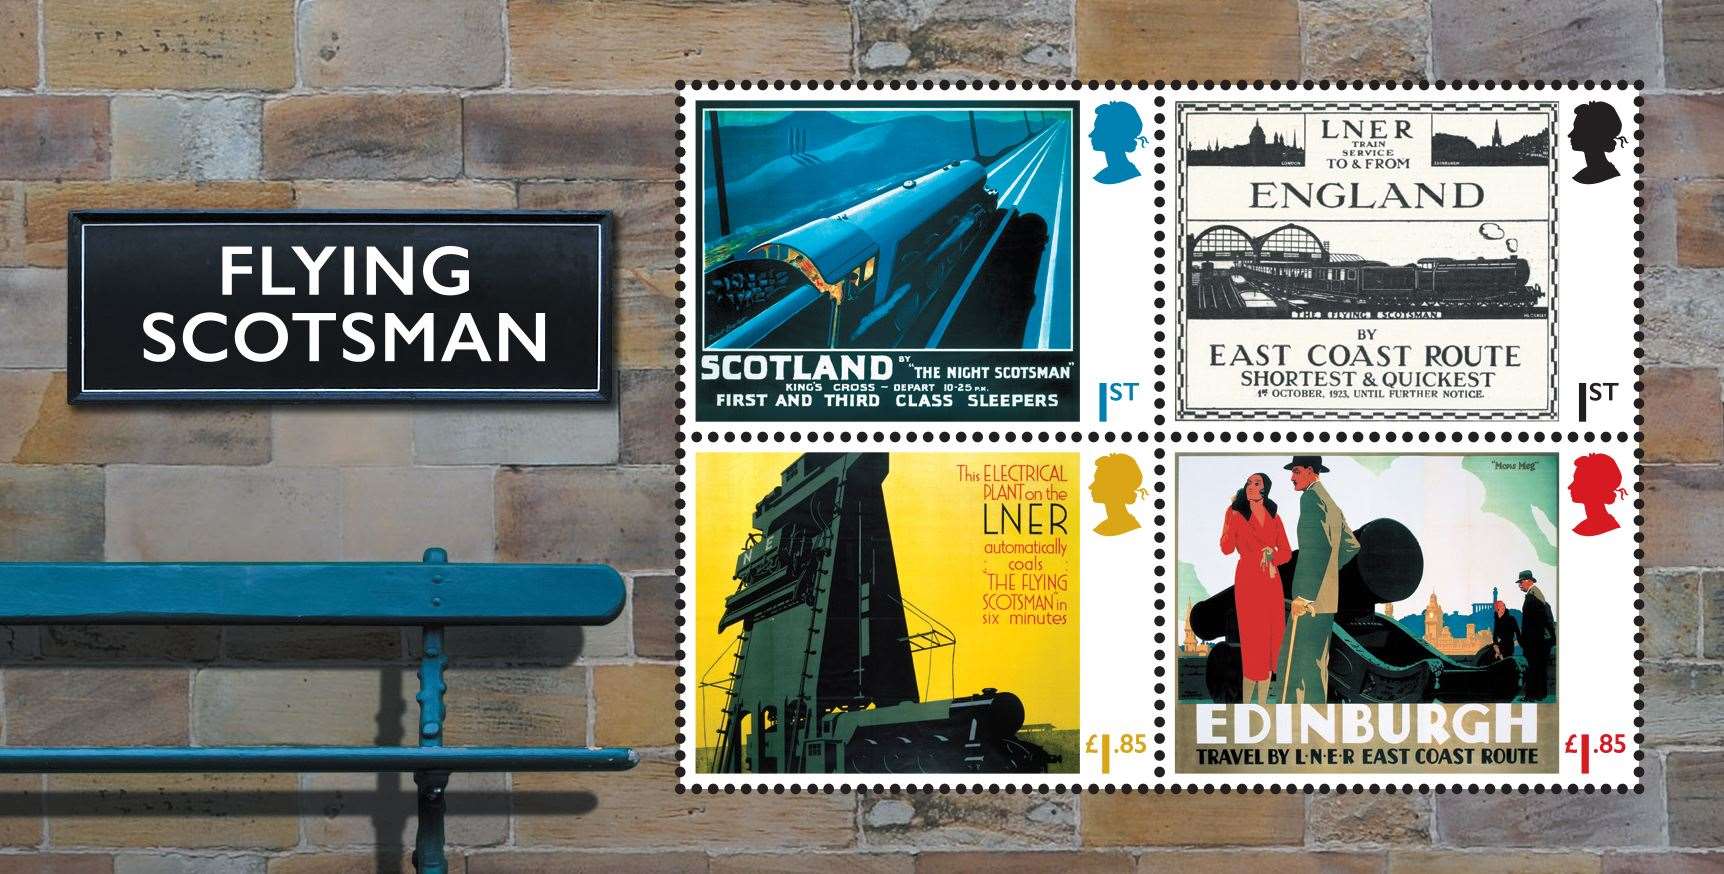 Four of 12 new stamps to mark the 100th anniversary of steam locomotive Flying Scotsman (Royal Mail/PA)